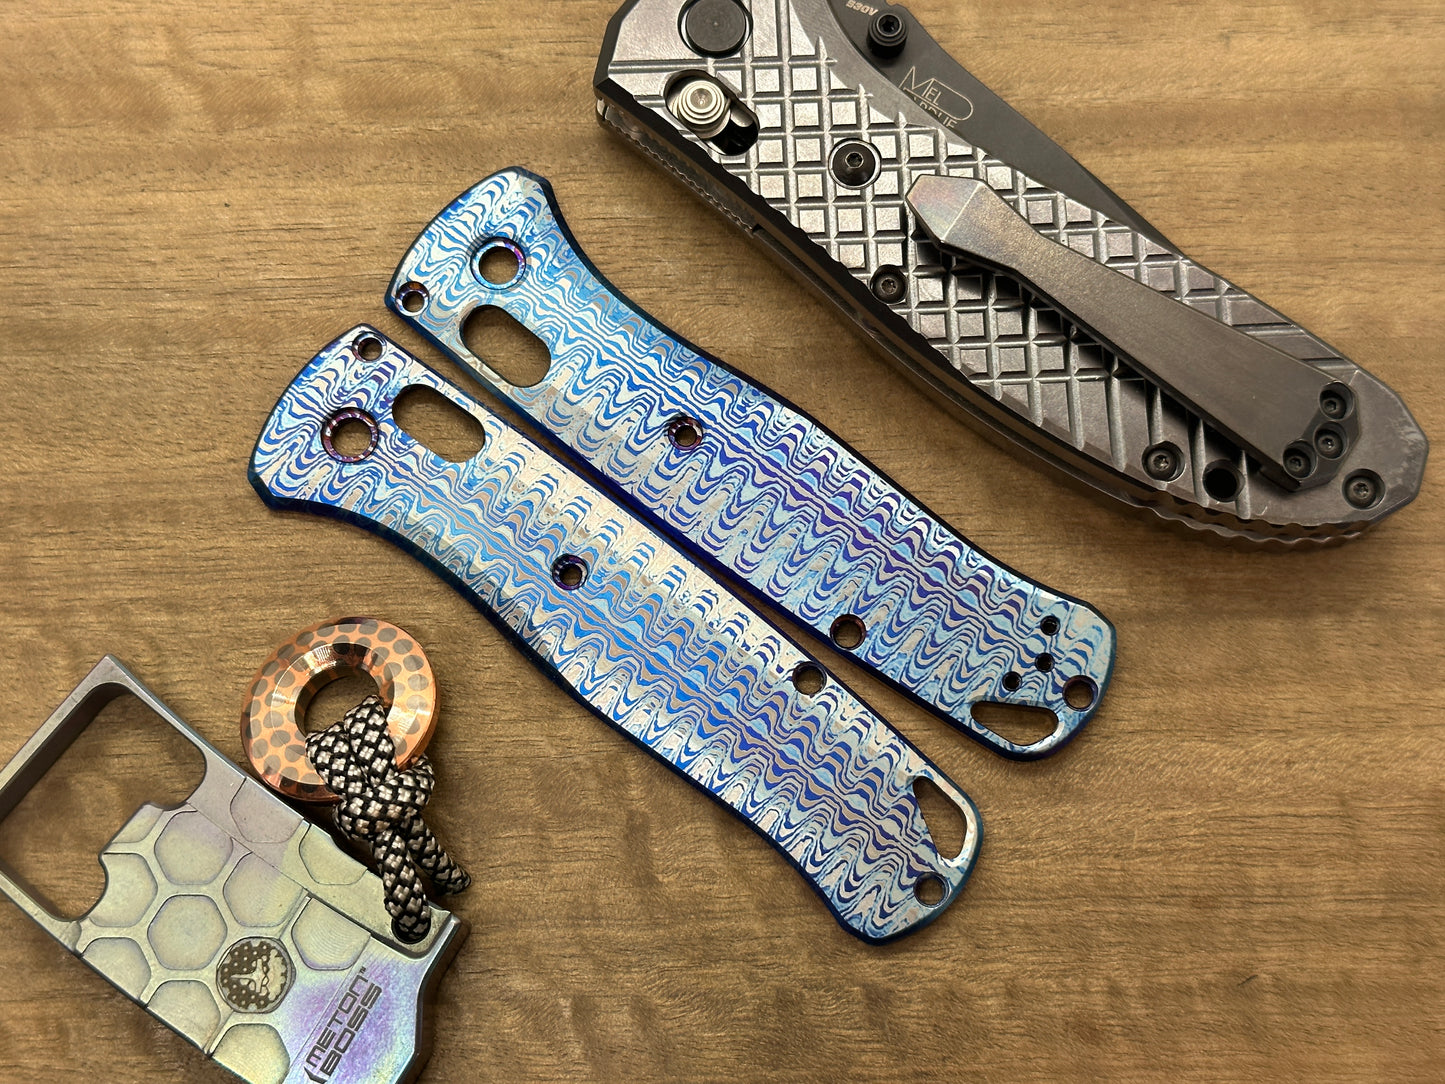 RIPPLE Flamed Titanium Scales for Benchmade Bugout 535